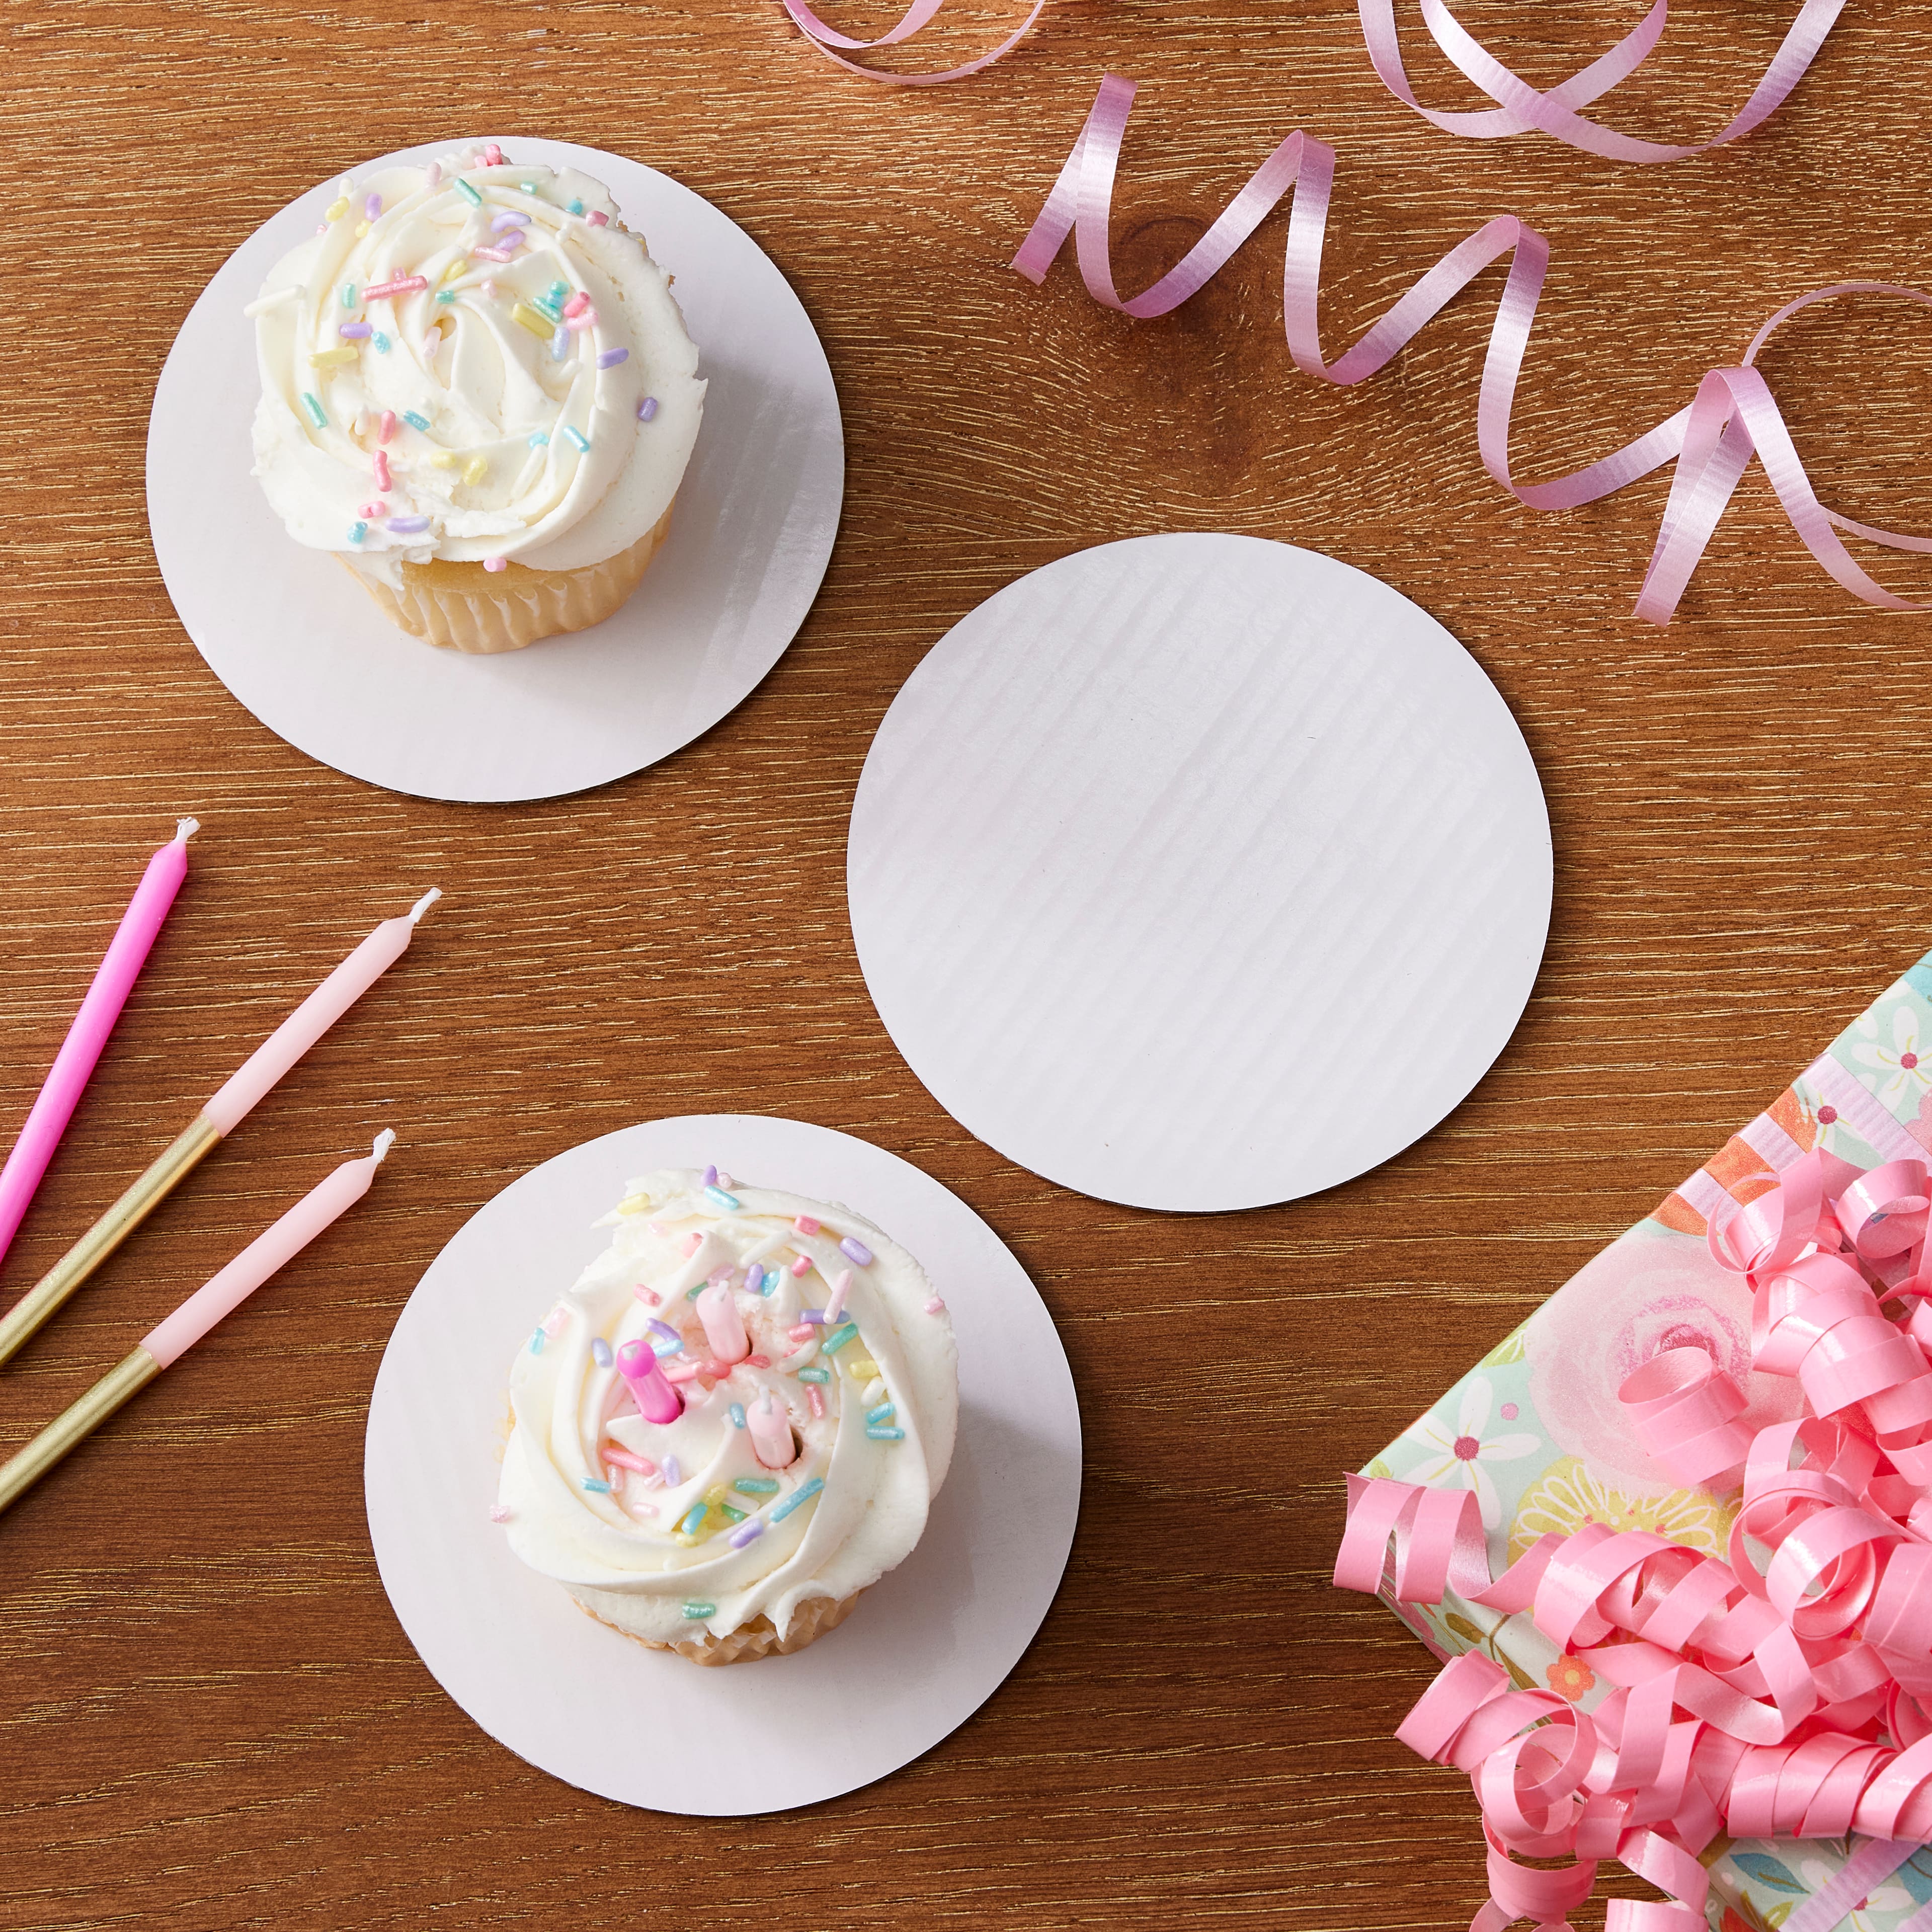 12 Packs: 8 ct. (96 total) White Mini Round Cake Boards by Celebrate It&#xAE;